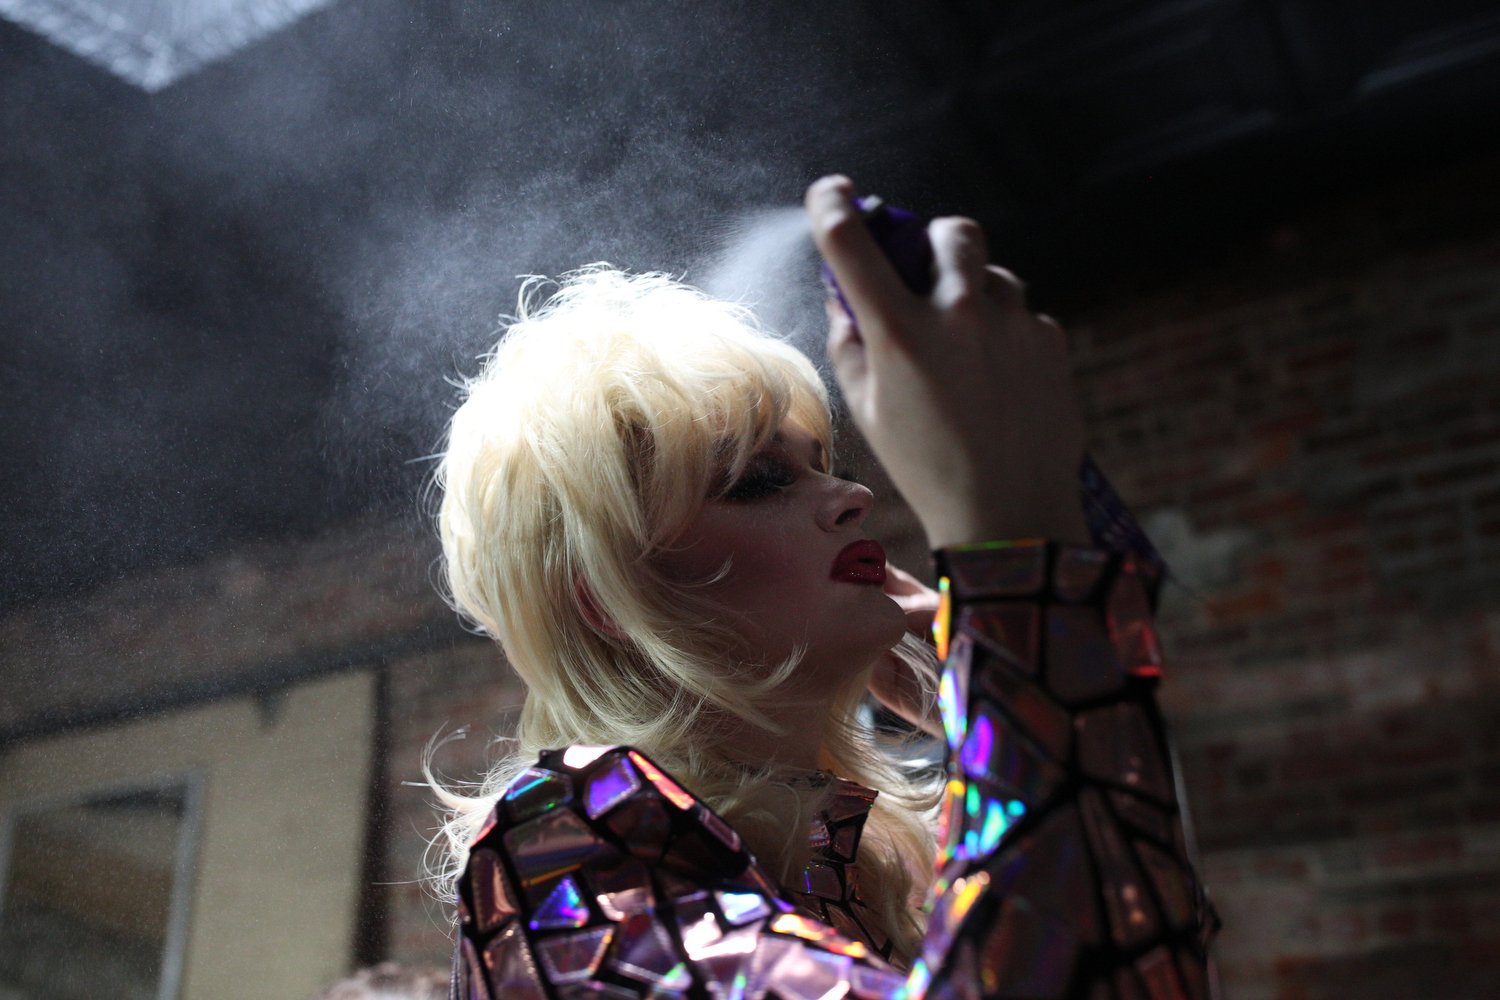  Veruca Salt, a drag performer based in Raleigh, sprays her hair before performing at The Herritage in Kinston, North Carolina. Salt explains that she snuck into her first drag event at age 17. "I saw the local queens do an amazing show and knew inst